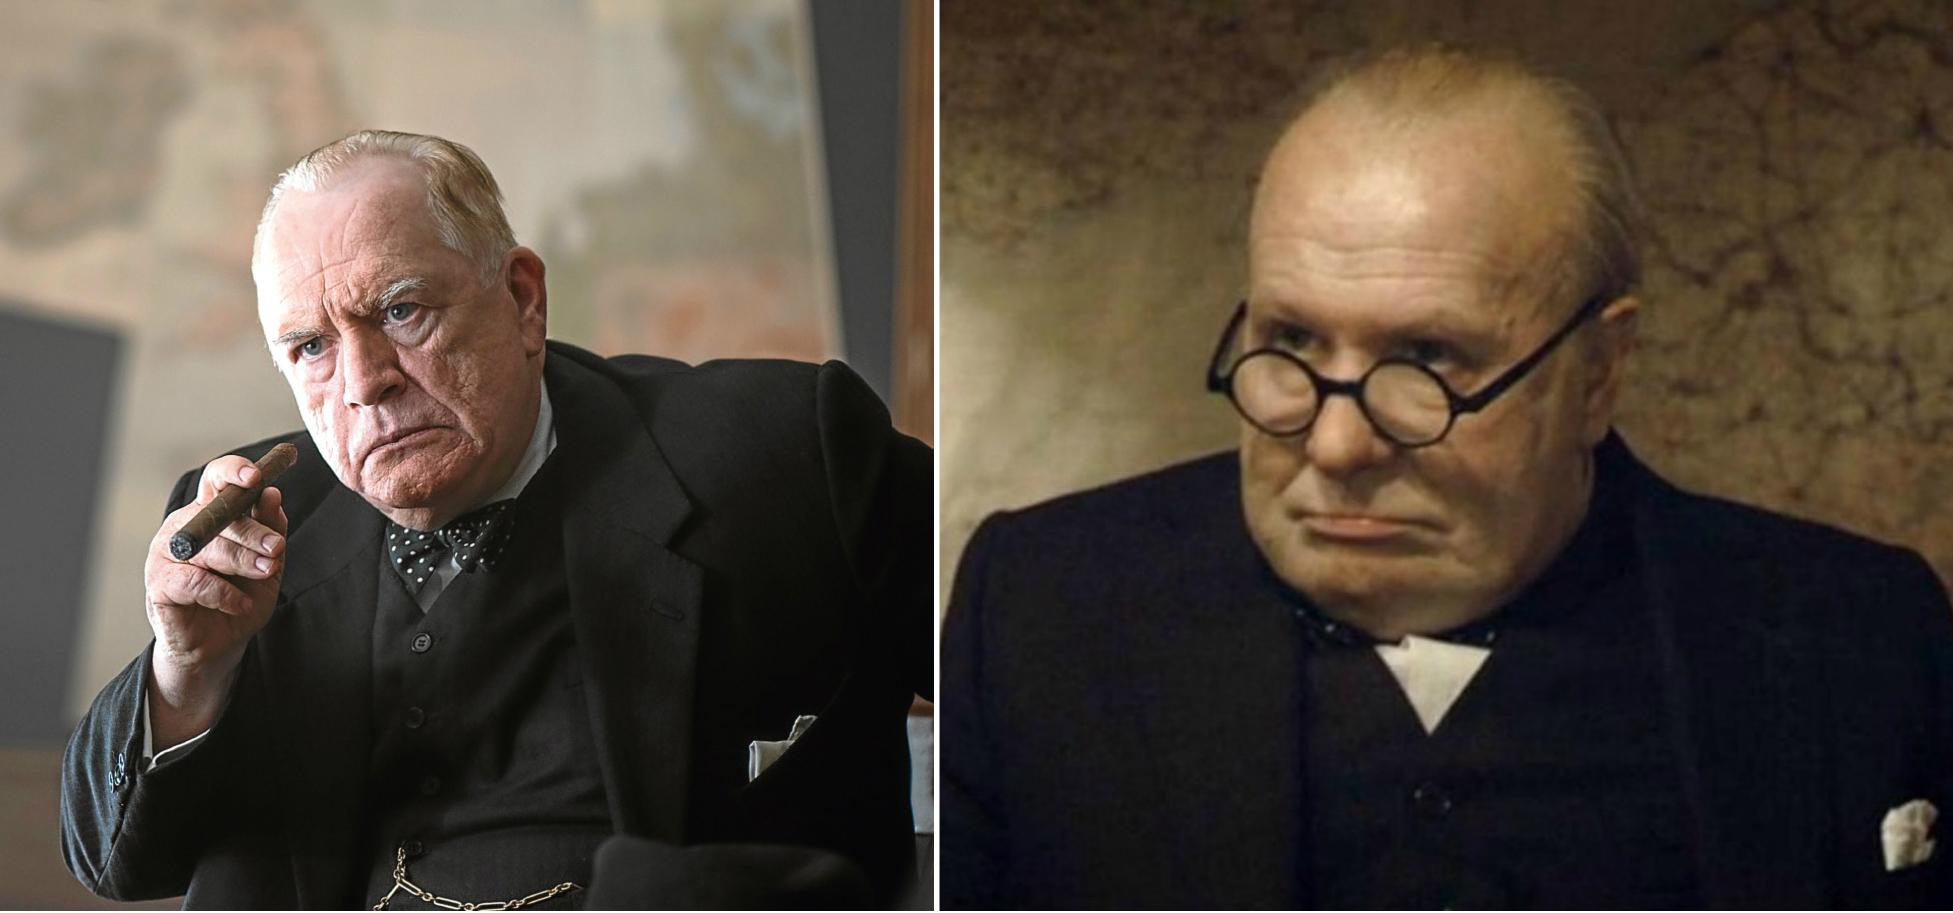 Brian Cox (left) and Gary Oldman (right) in ‘Churchill’ and ‘Darkest Hour’